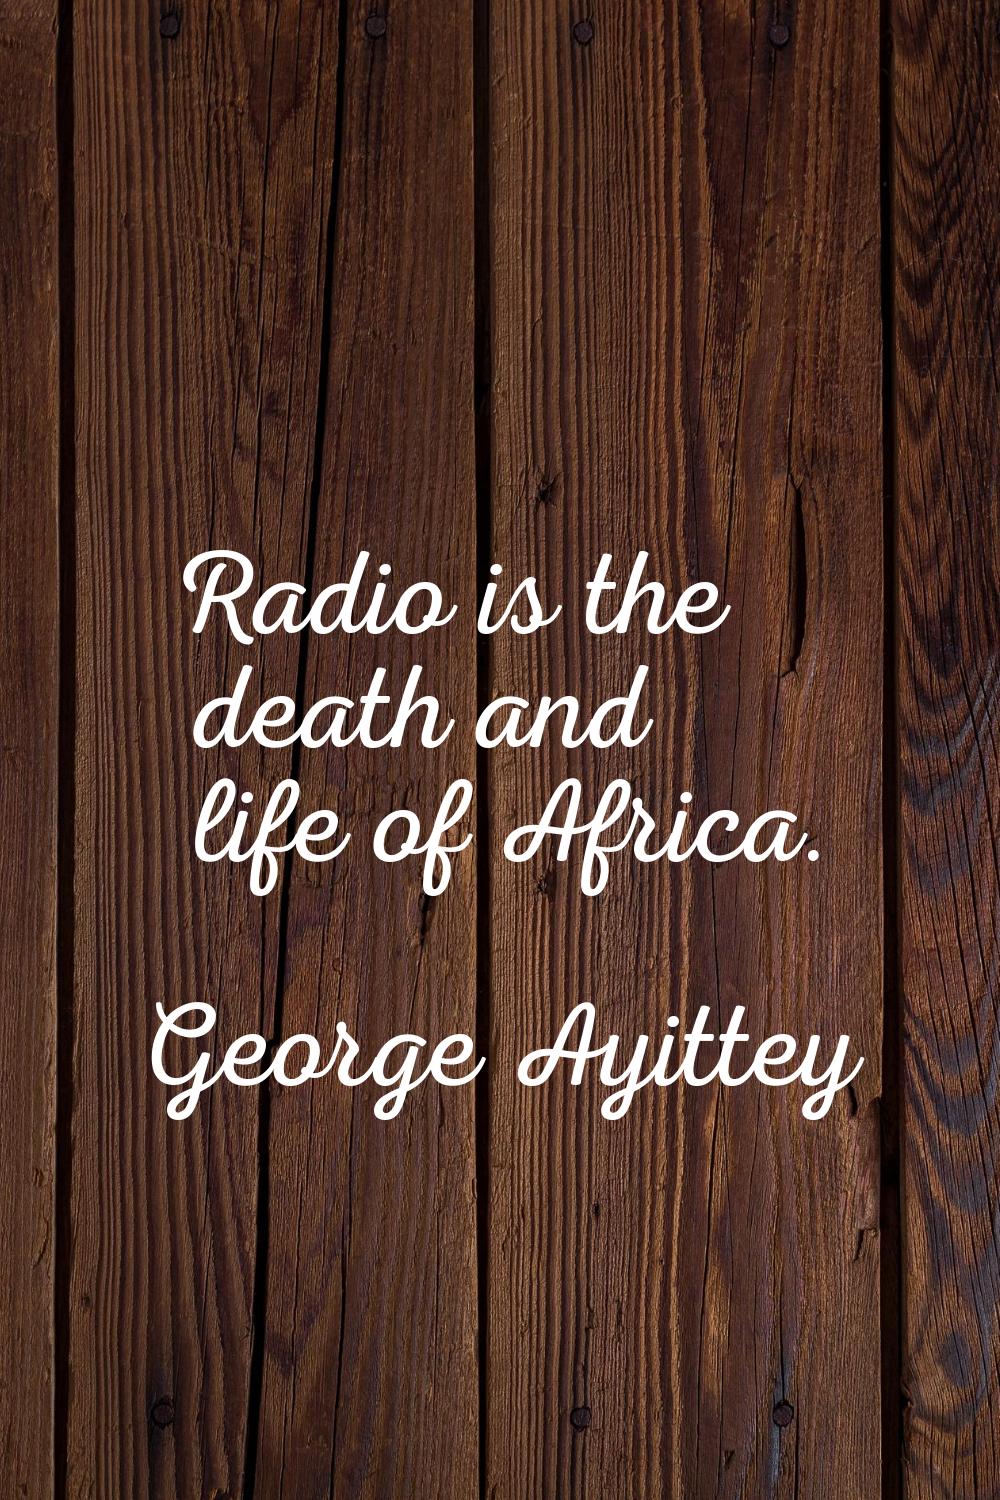 Radio is the death and life of Africa.